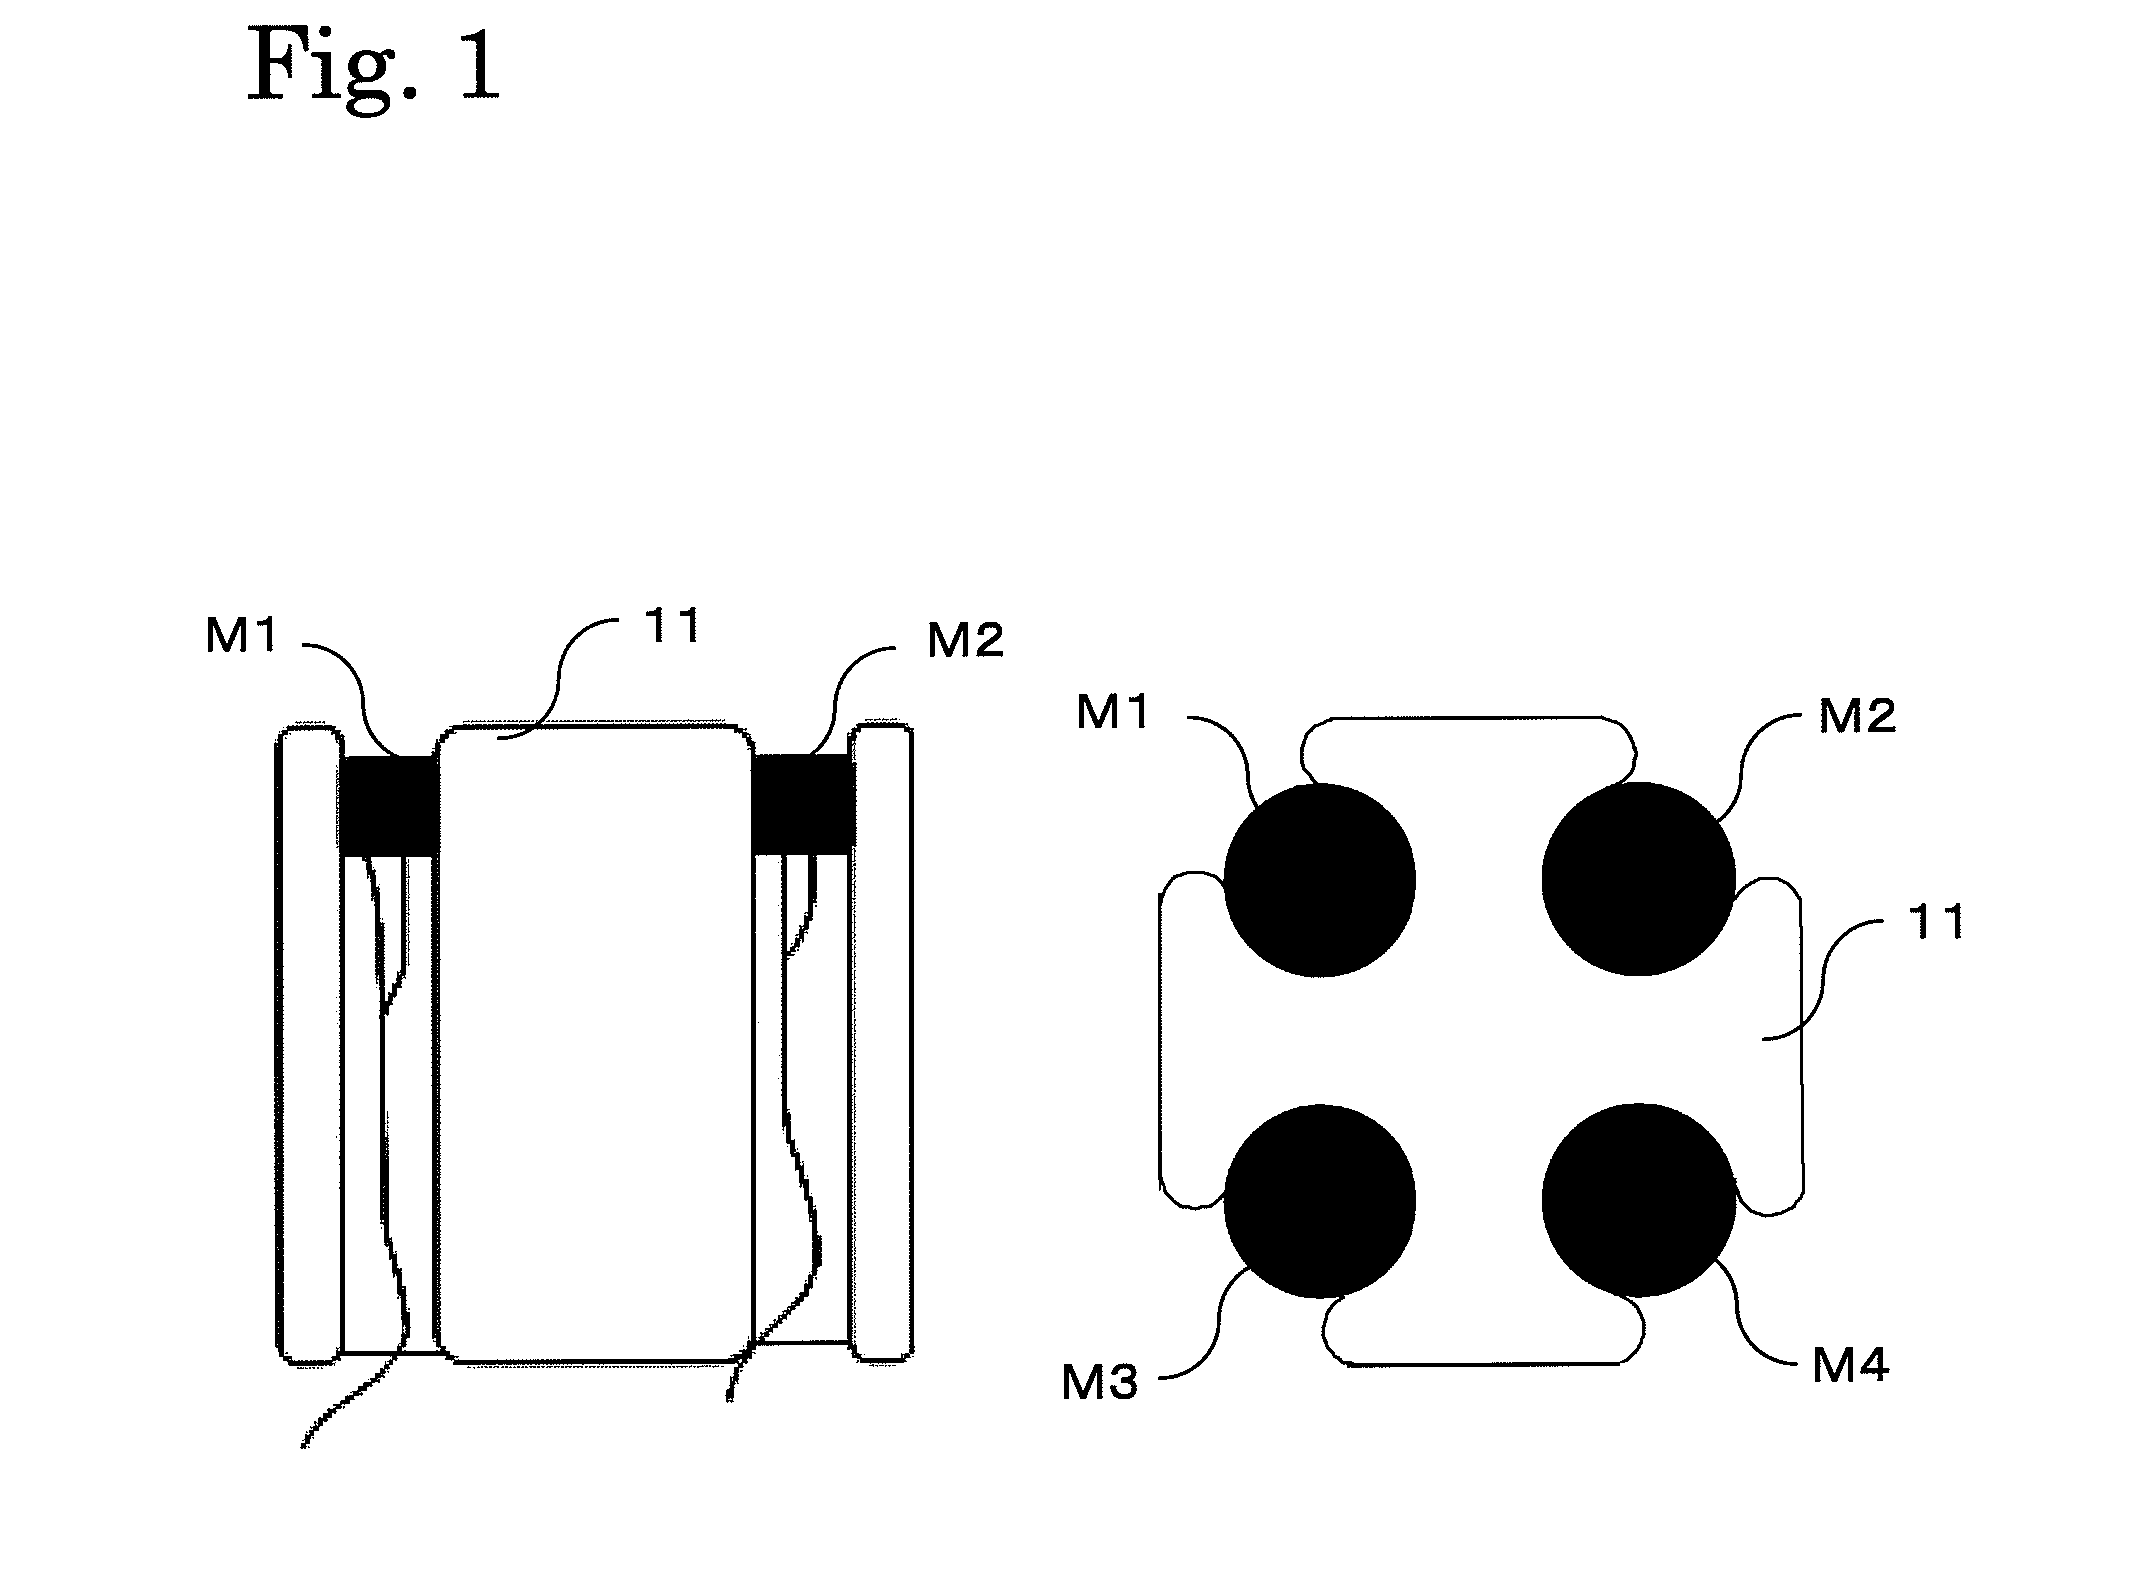 Sound collection/reproduction method and device